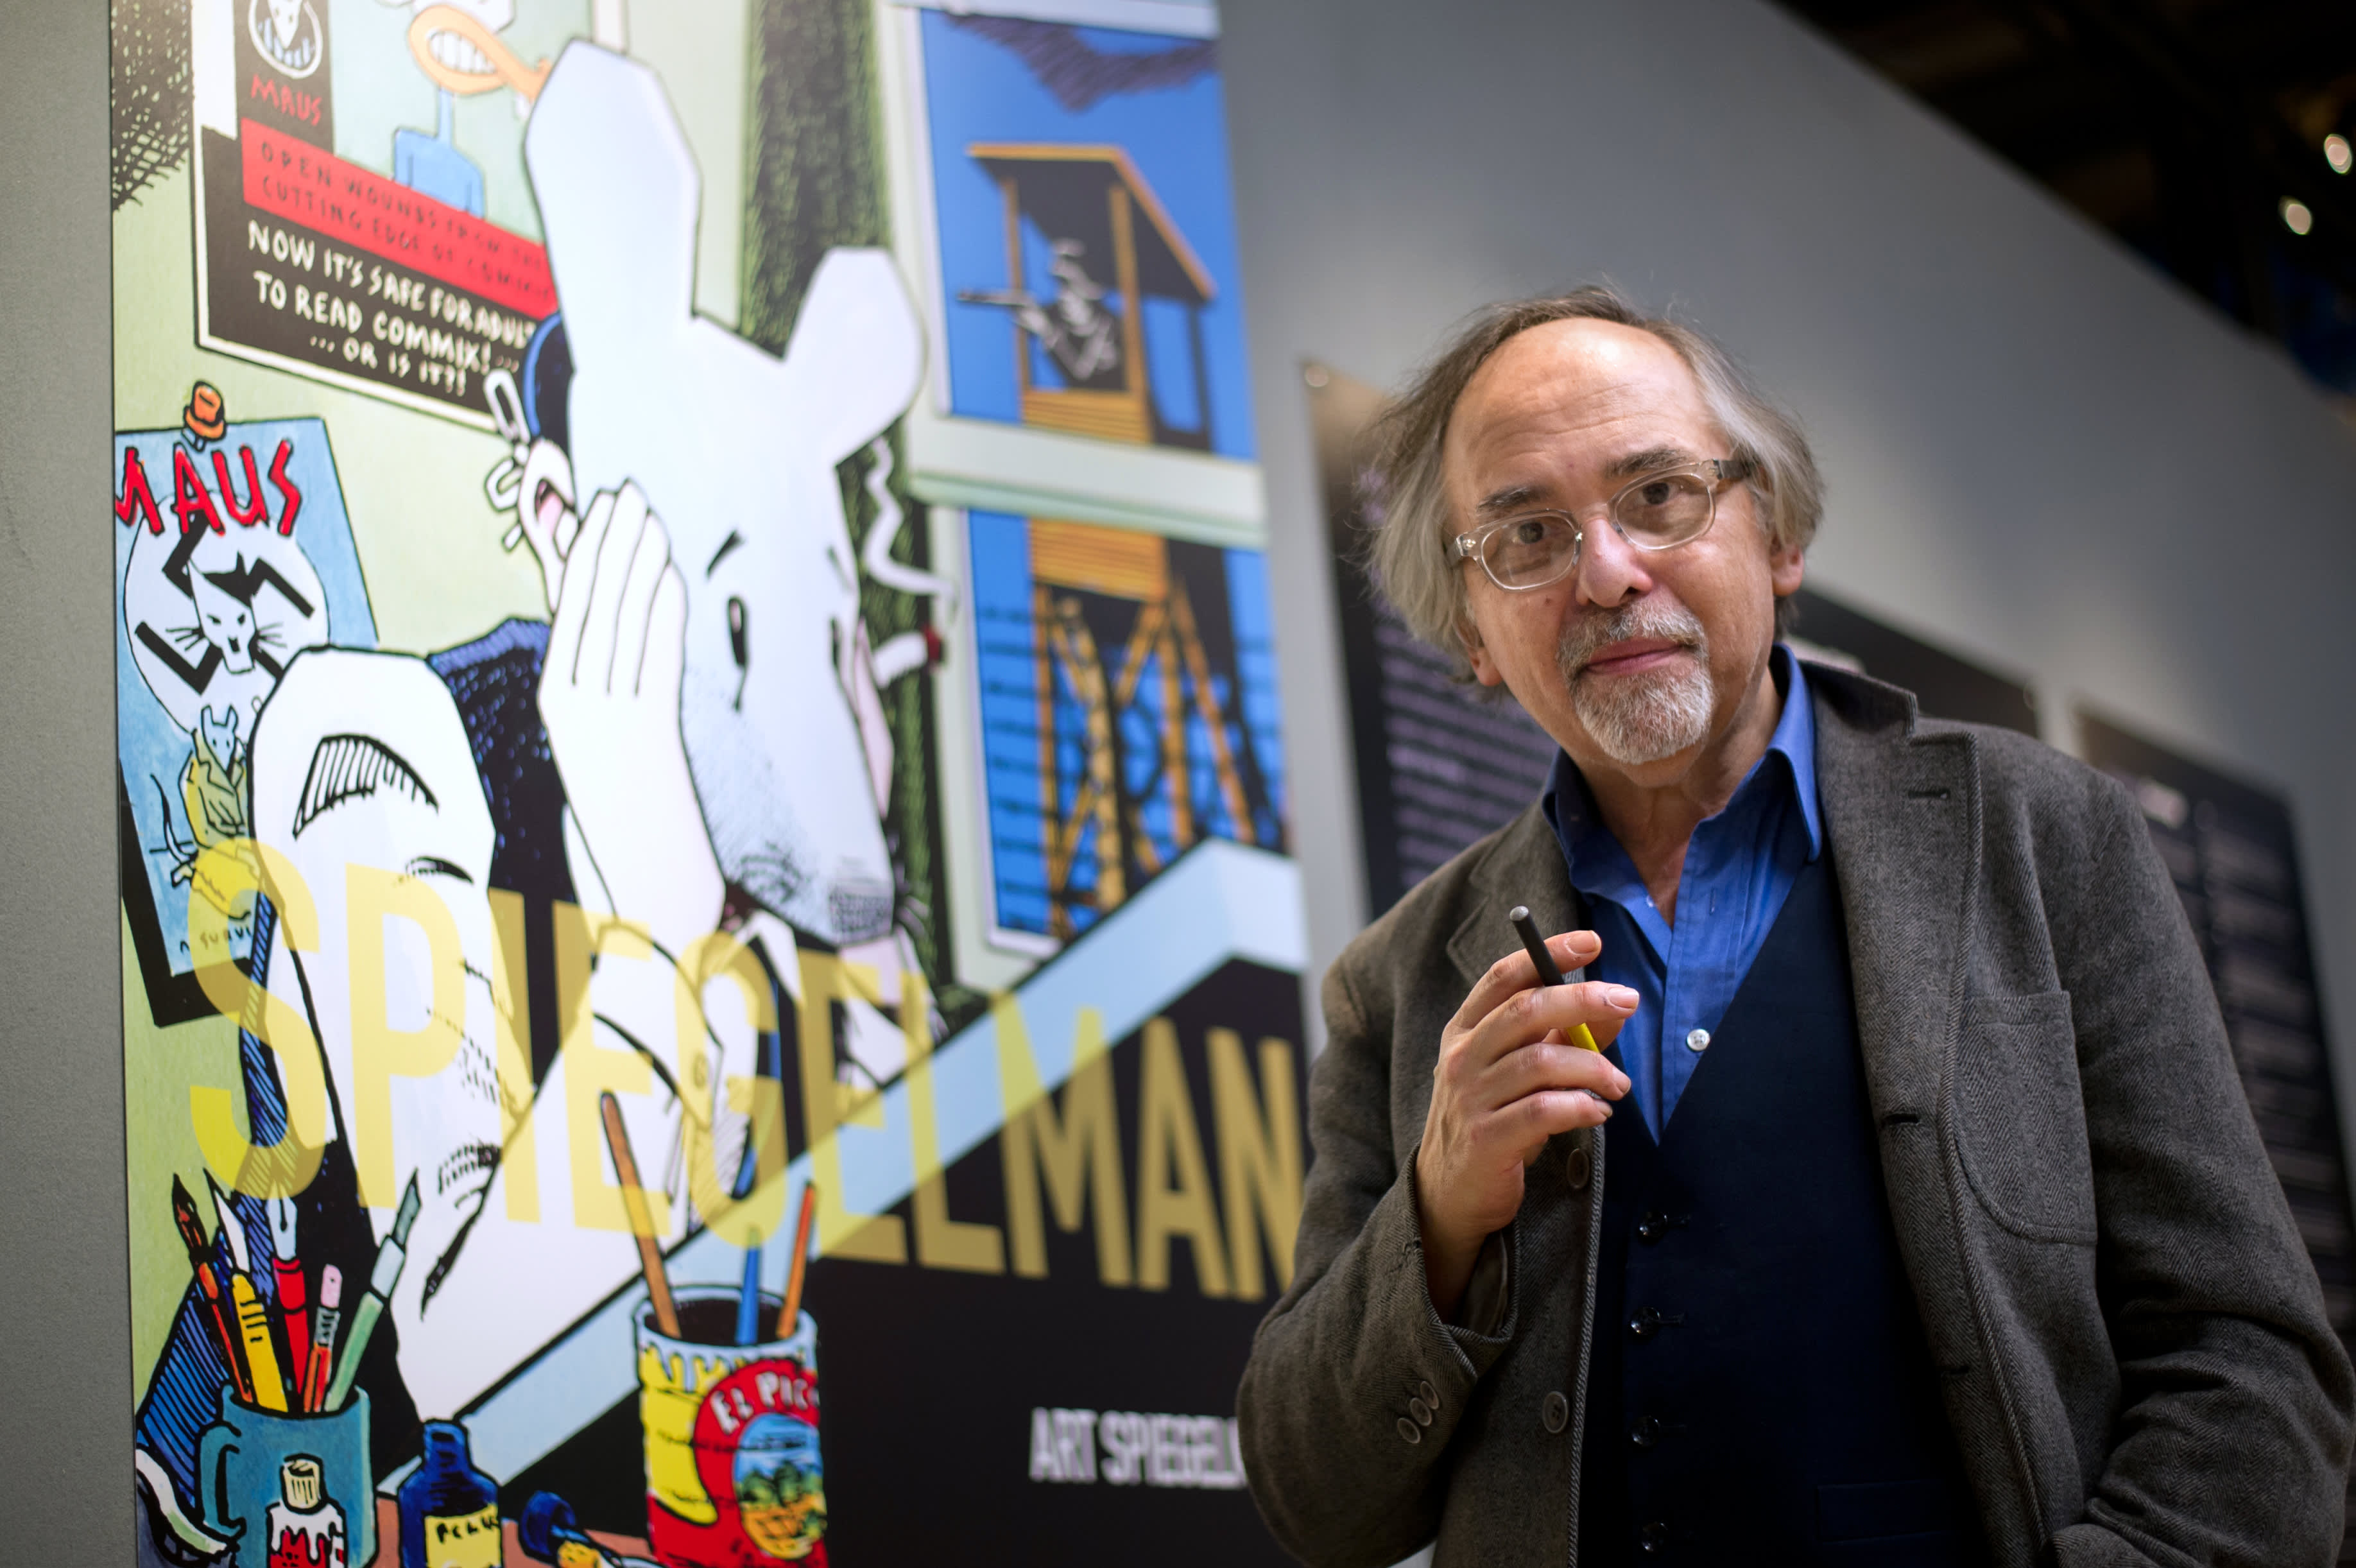 Tennessee school board bans Holocaust graphic novel ‘Maus’ – author Art Spiegelman condemns the move as ‘Orwellian’ – CNBC